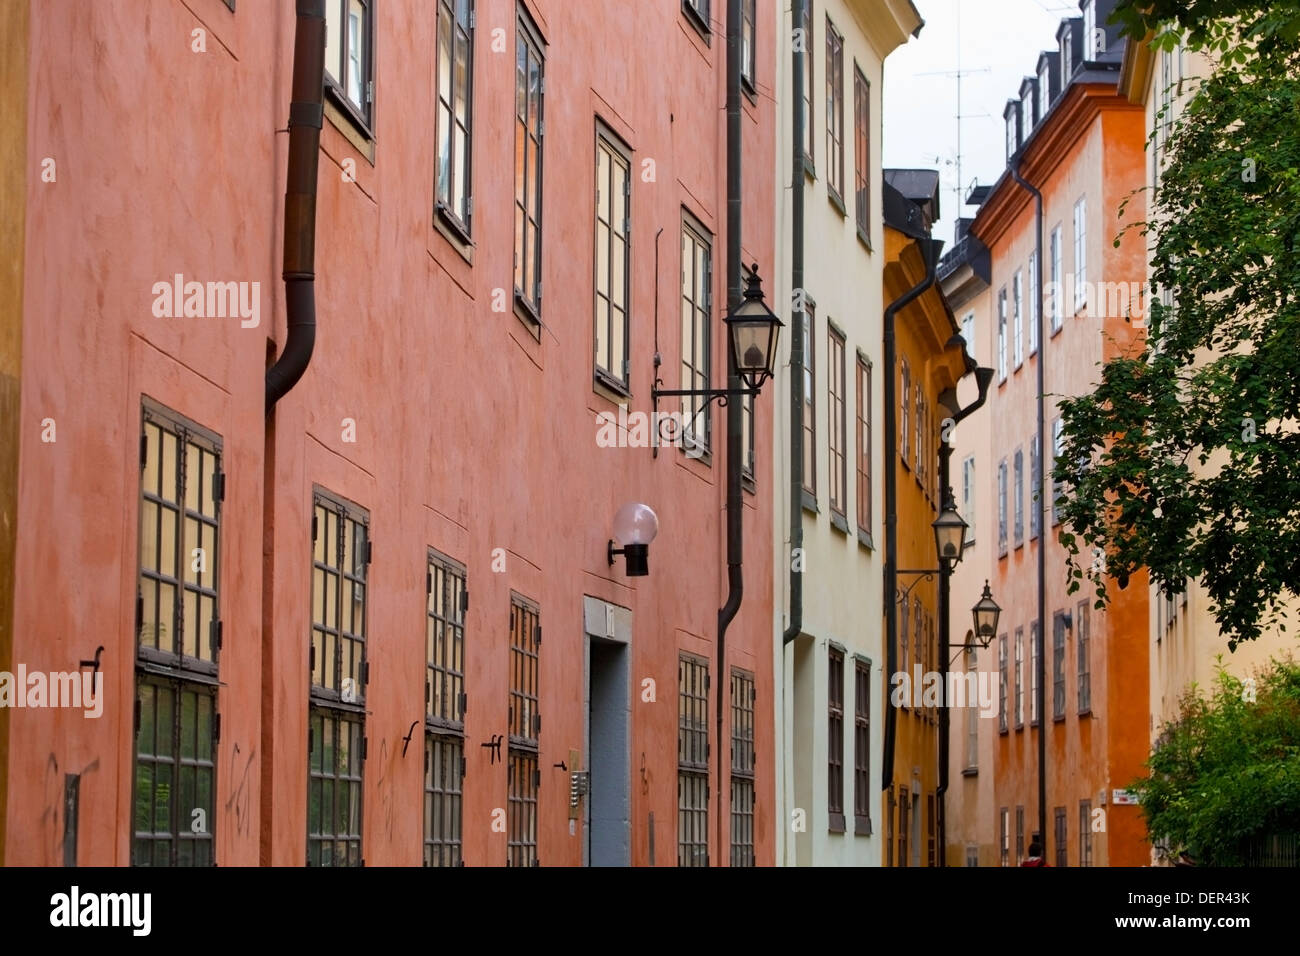 Colorful buildings in the old town / Gamla Stan of Stockholm, Sweden, Europe Stock Photo